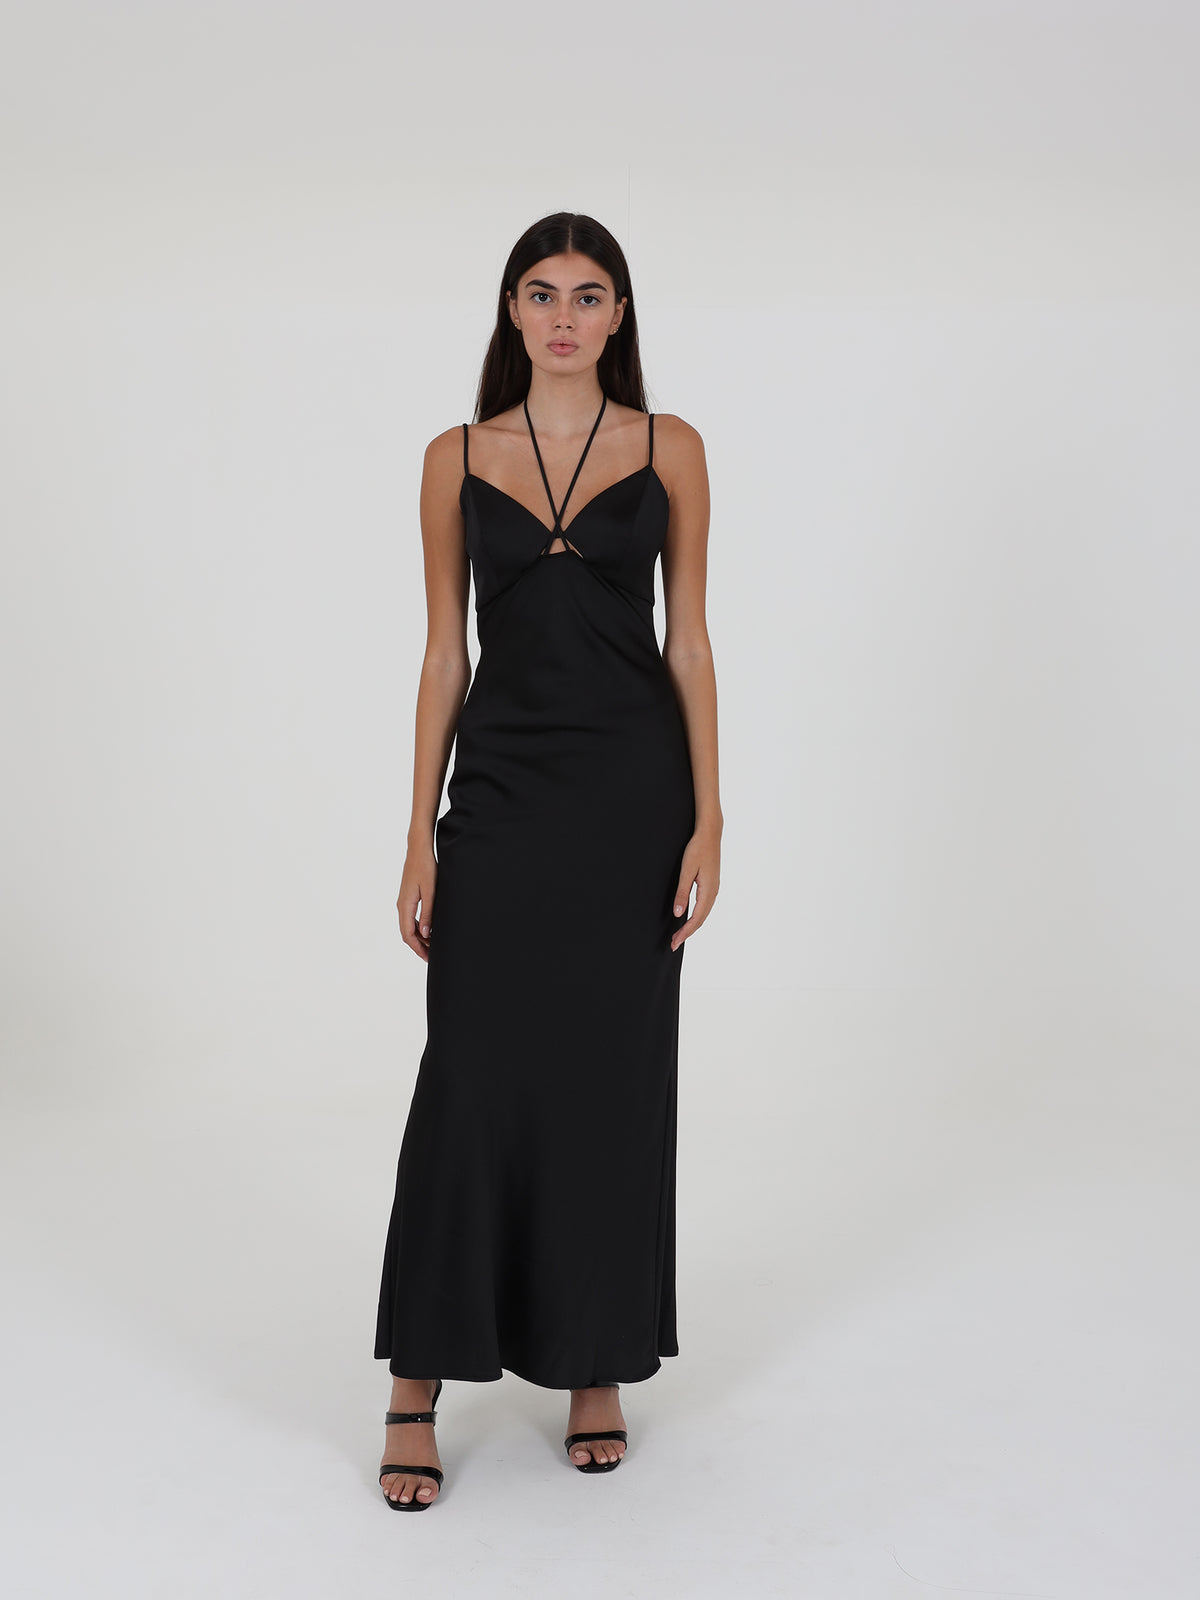 Black Satin Dress With Cut Out Details